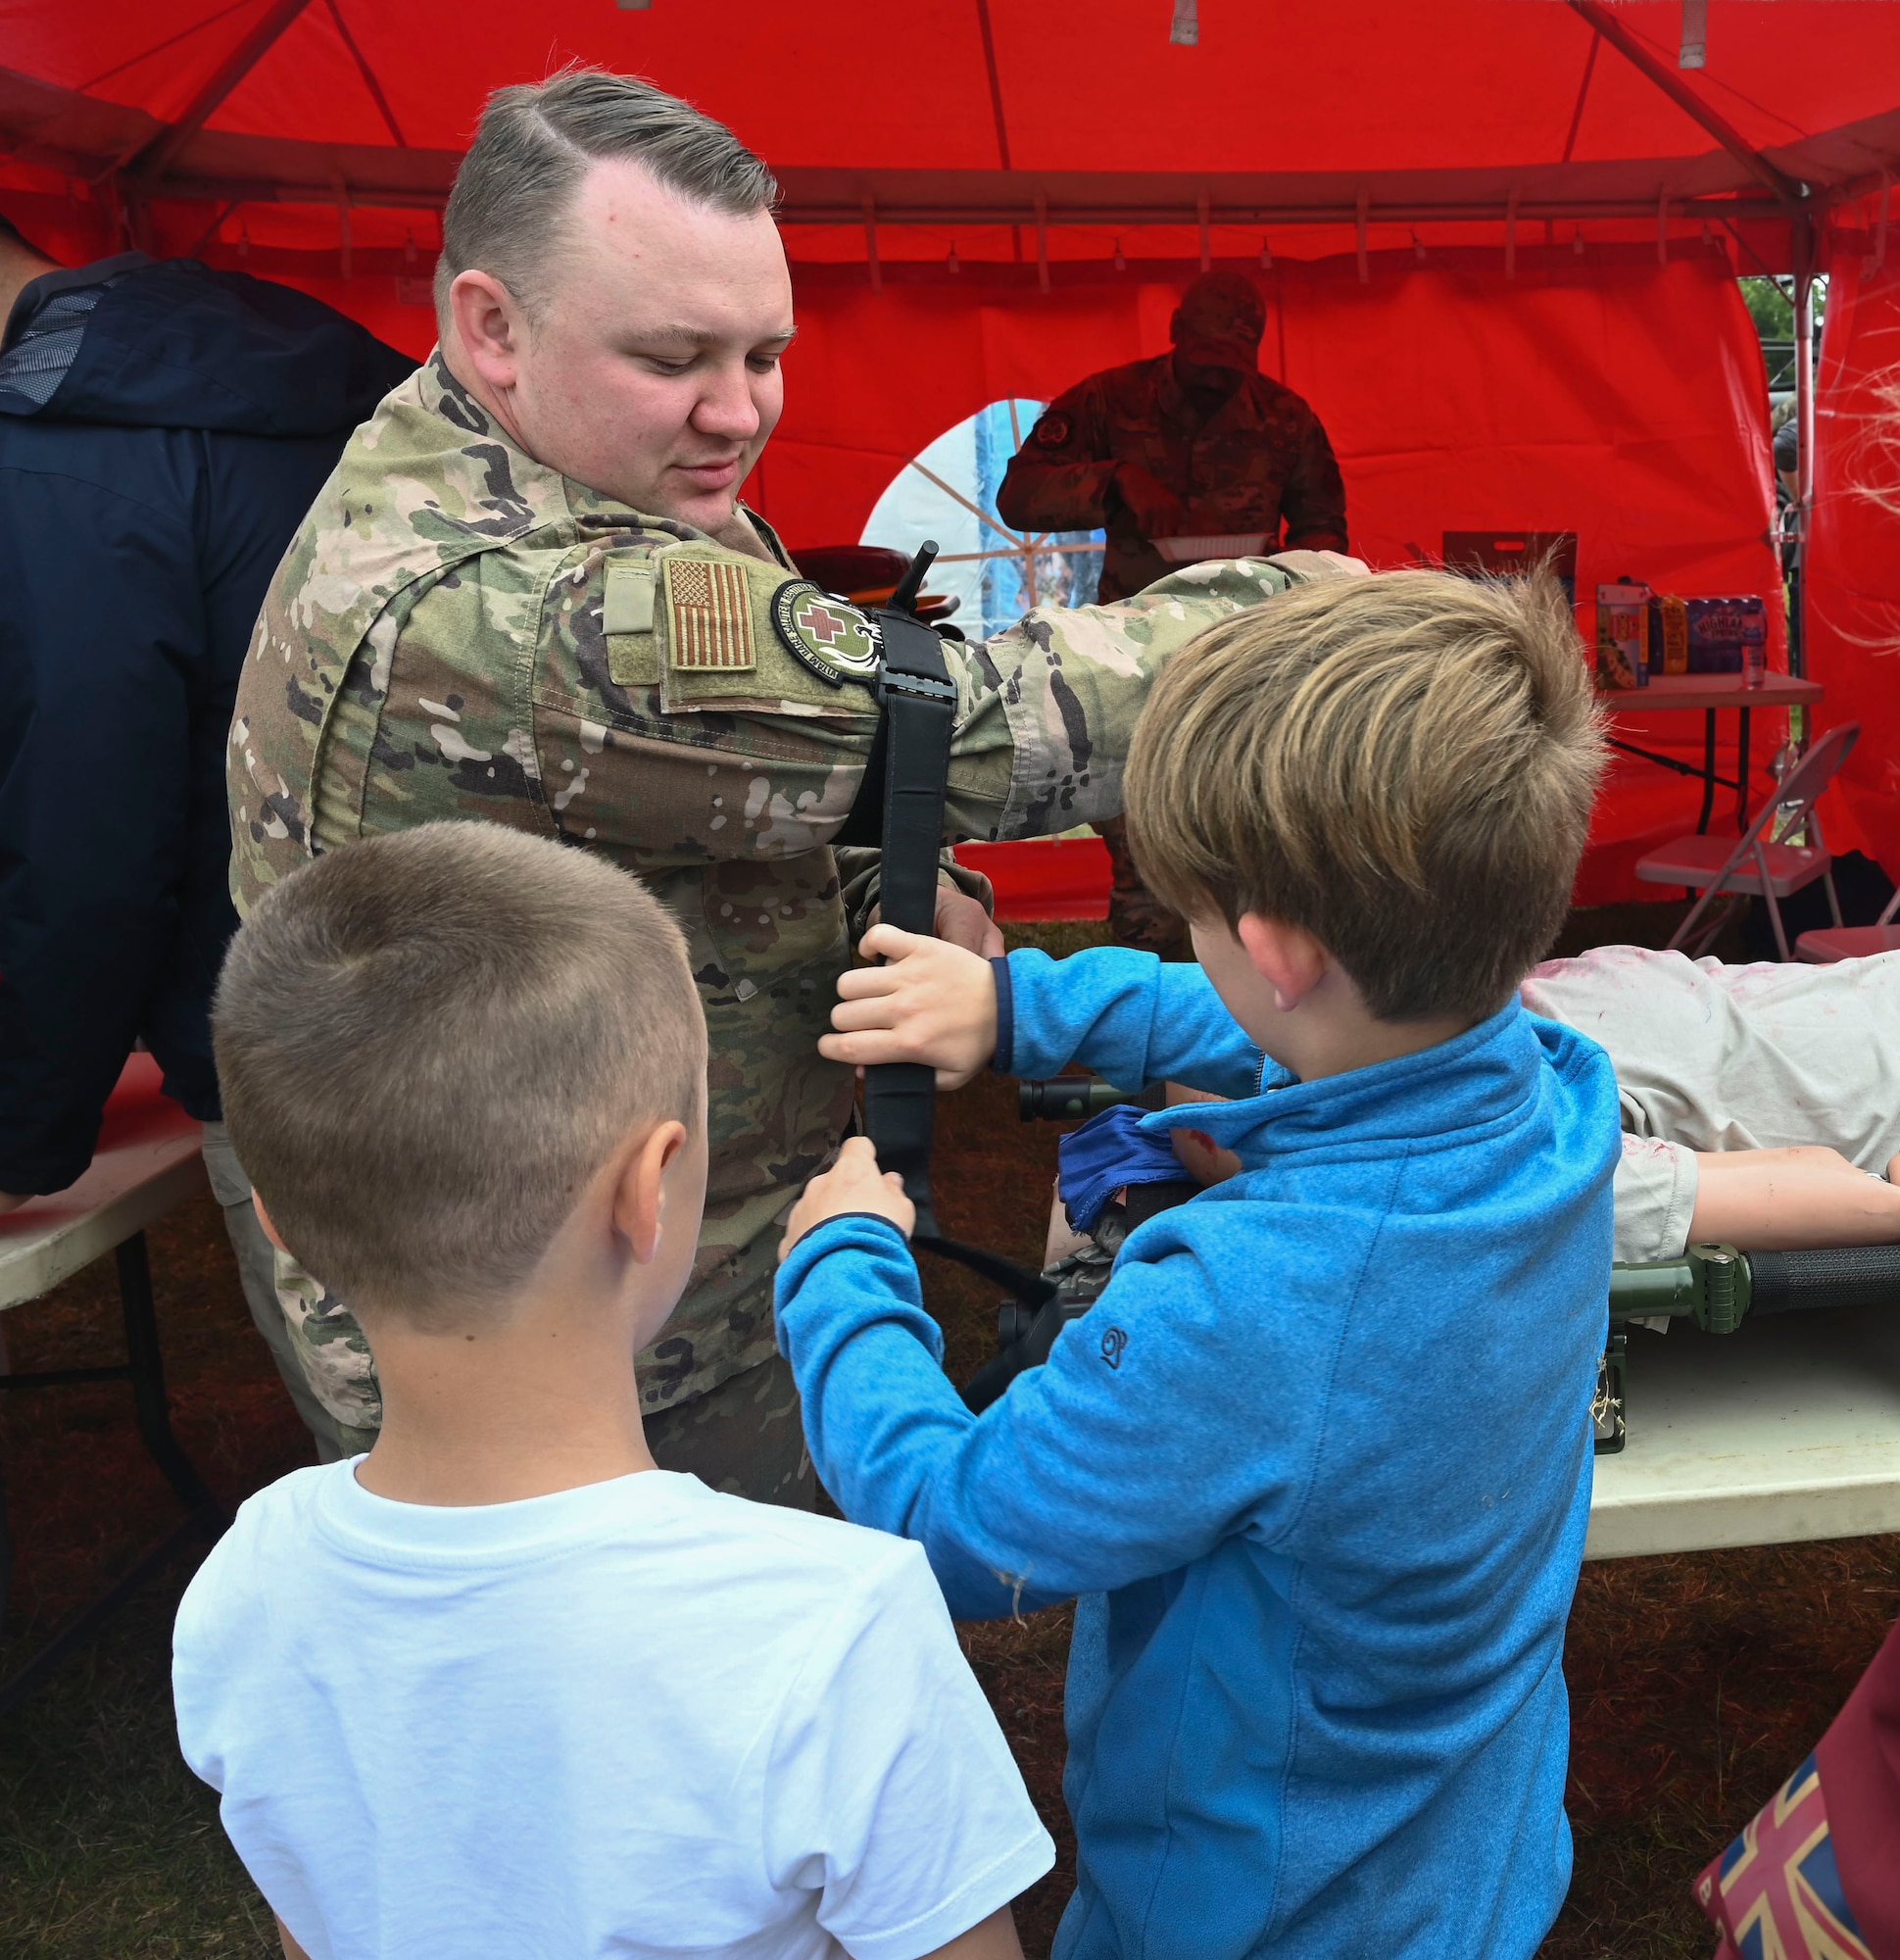 The Suffolk Show provided U.S. visiting forces an opportunity to work with Suffolk military units to strengthen ties in the community.